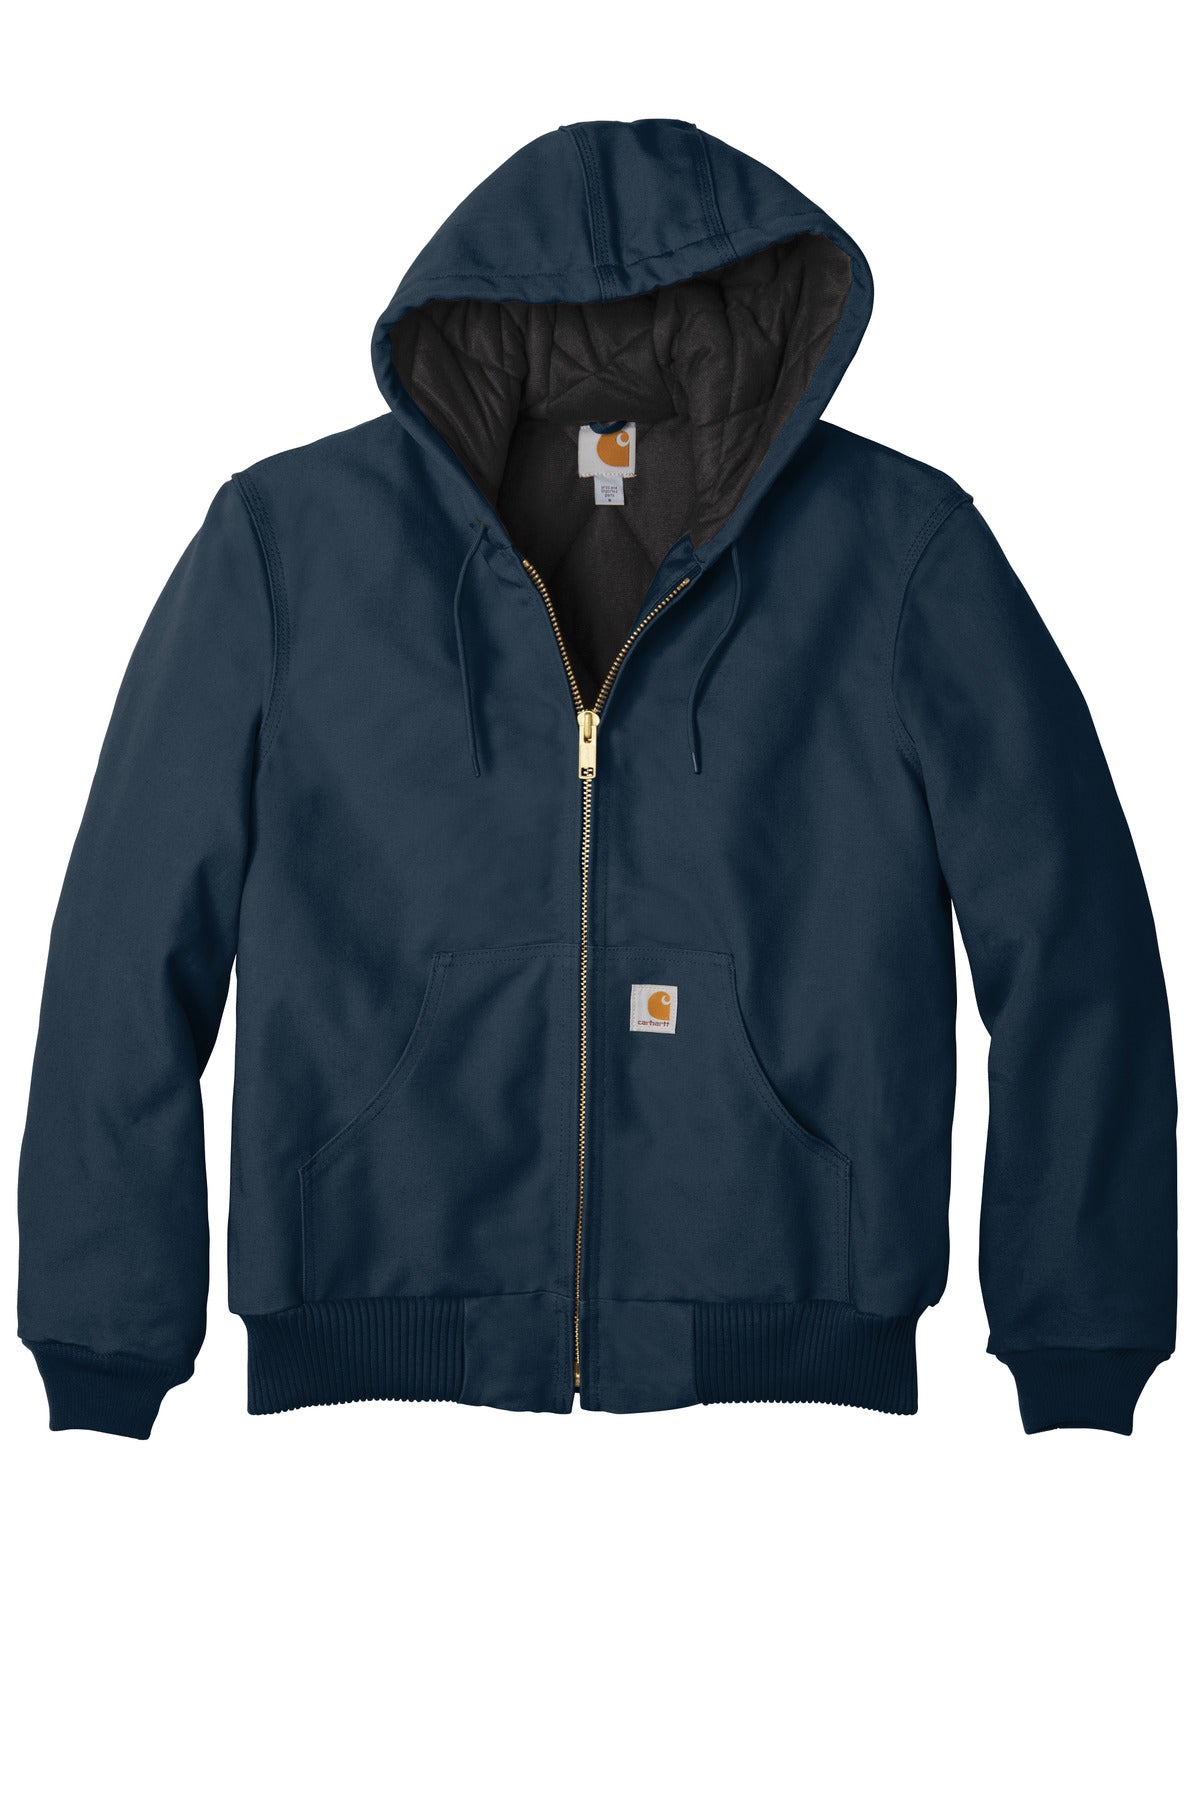 Carhartt  Quilted-Flannel-Lined Duck Active Jac. CTSJ140